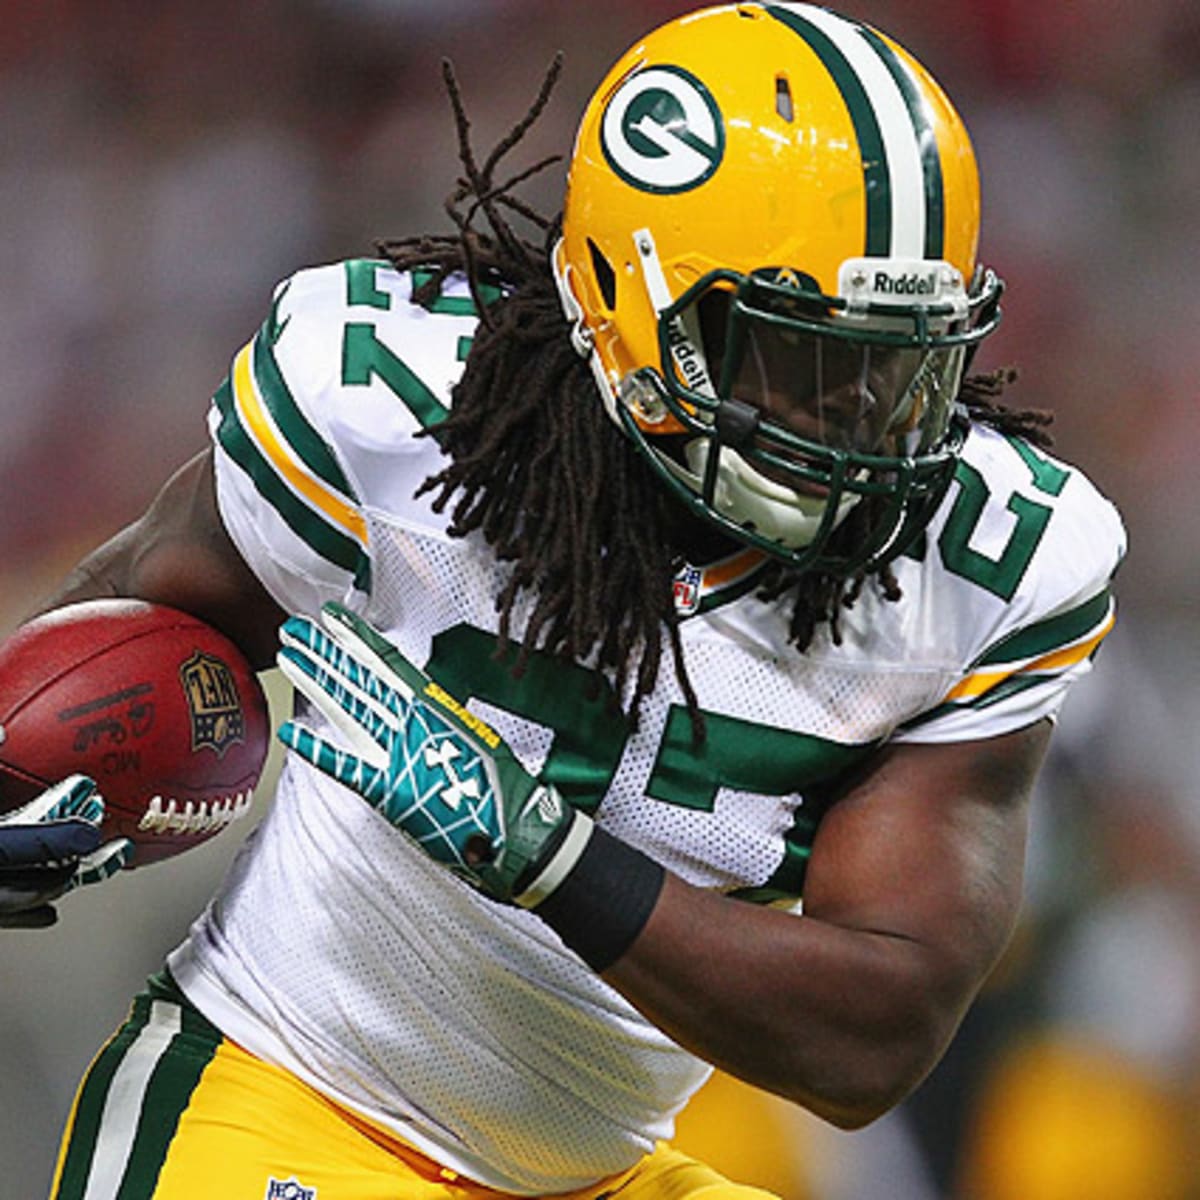 Eddie Lacy suffers concussion on high hit by Brandon Meriweather